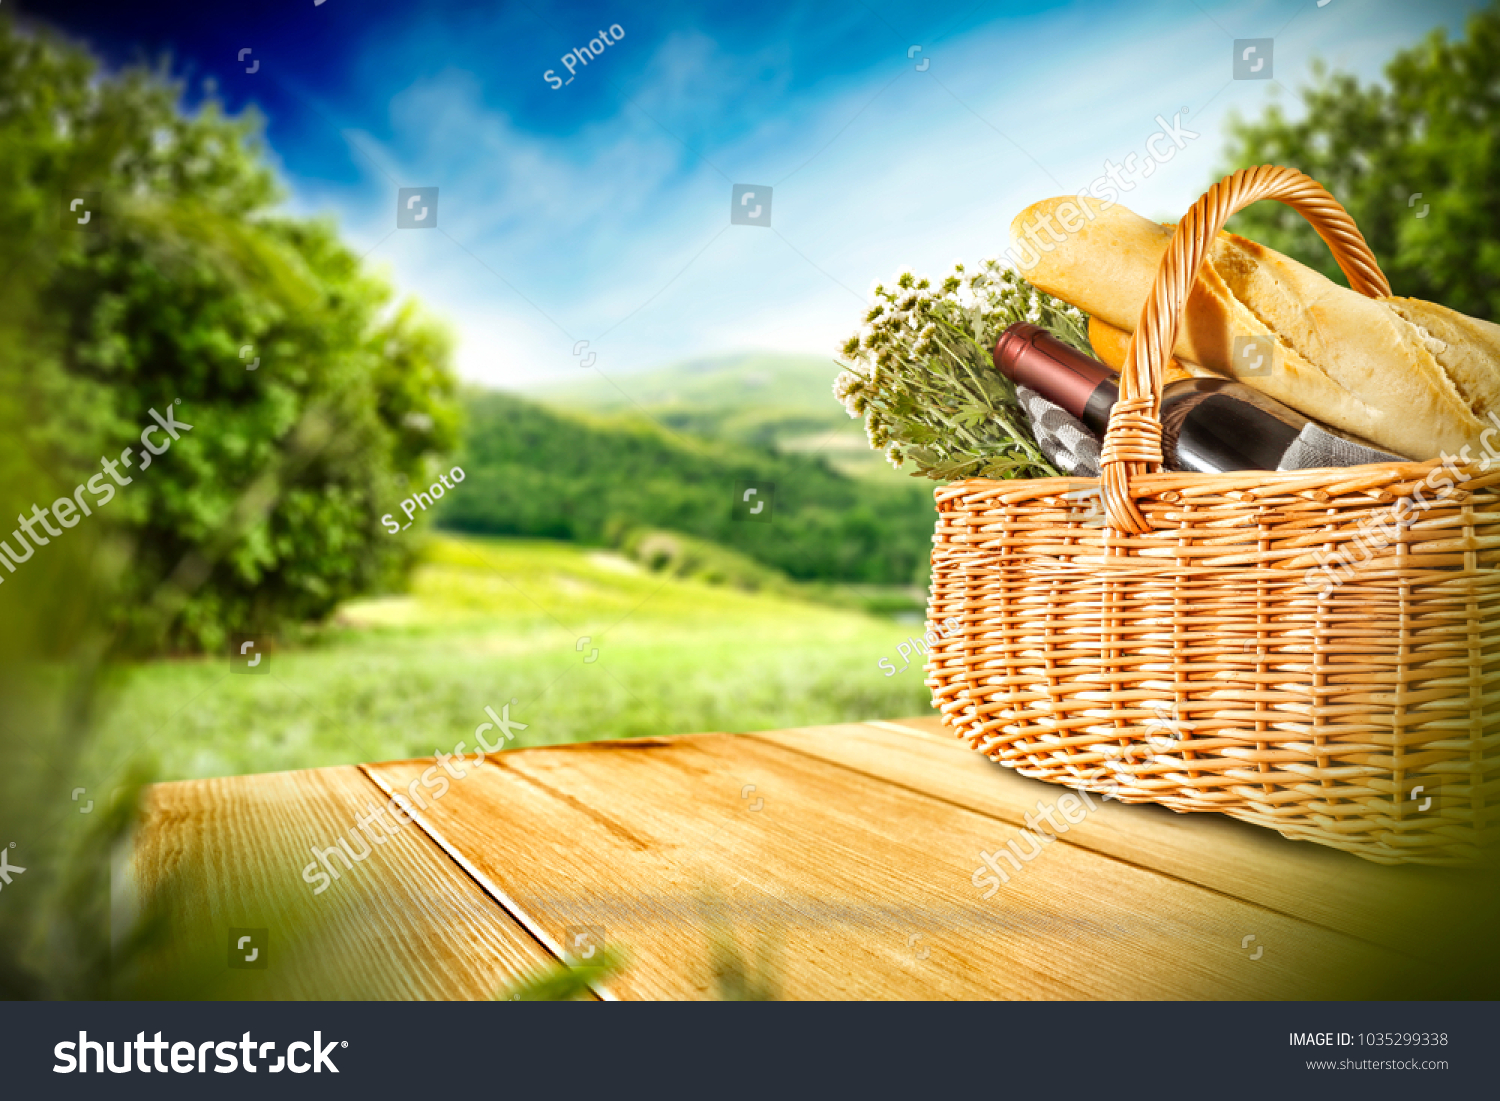 Picnic Basket On Wooden Table Free Stock Photo Edit Now 1035299338